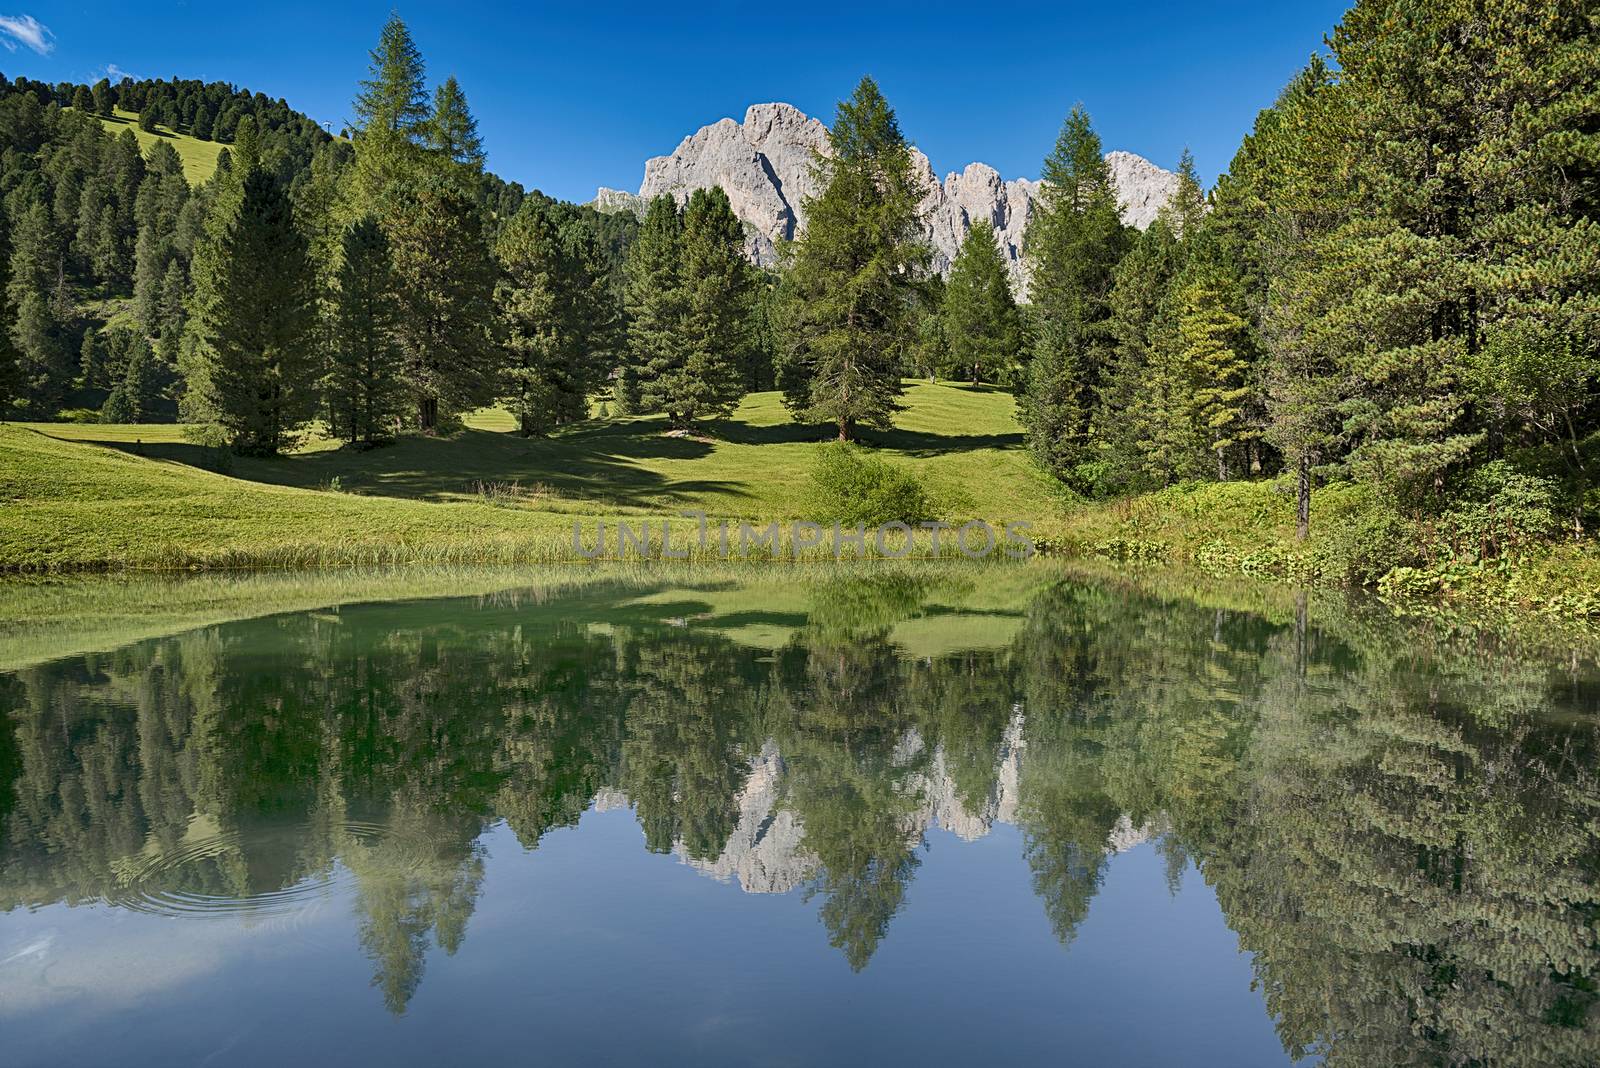 Lake in the forest with the mountains in background, Dolomites by Mdc1970